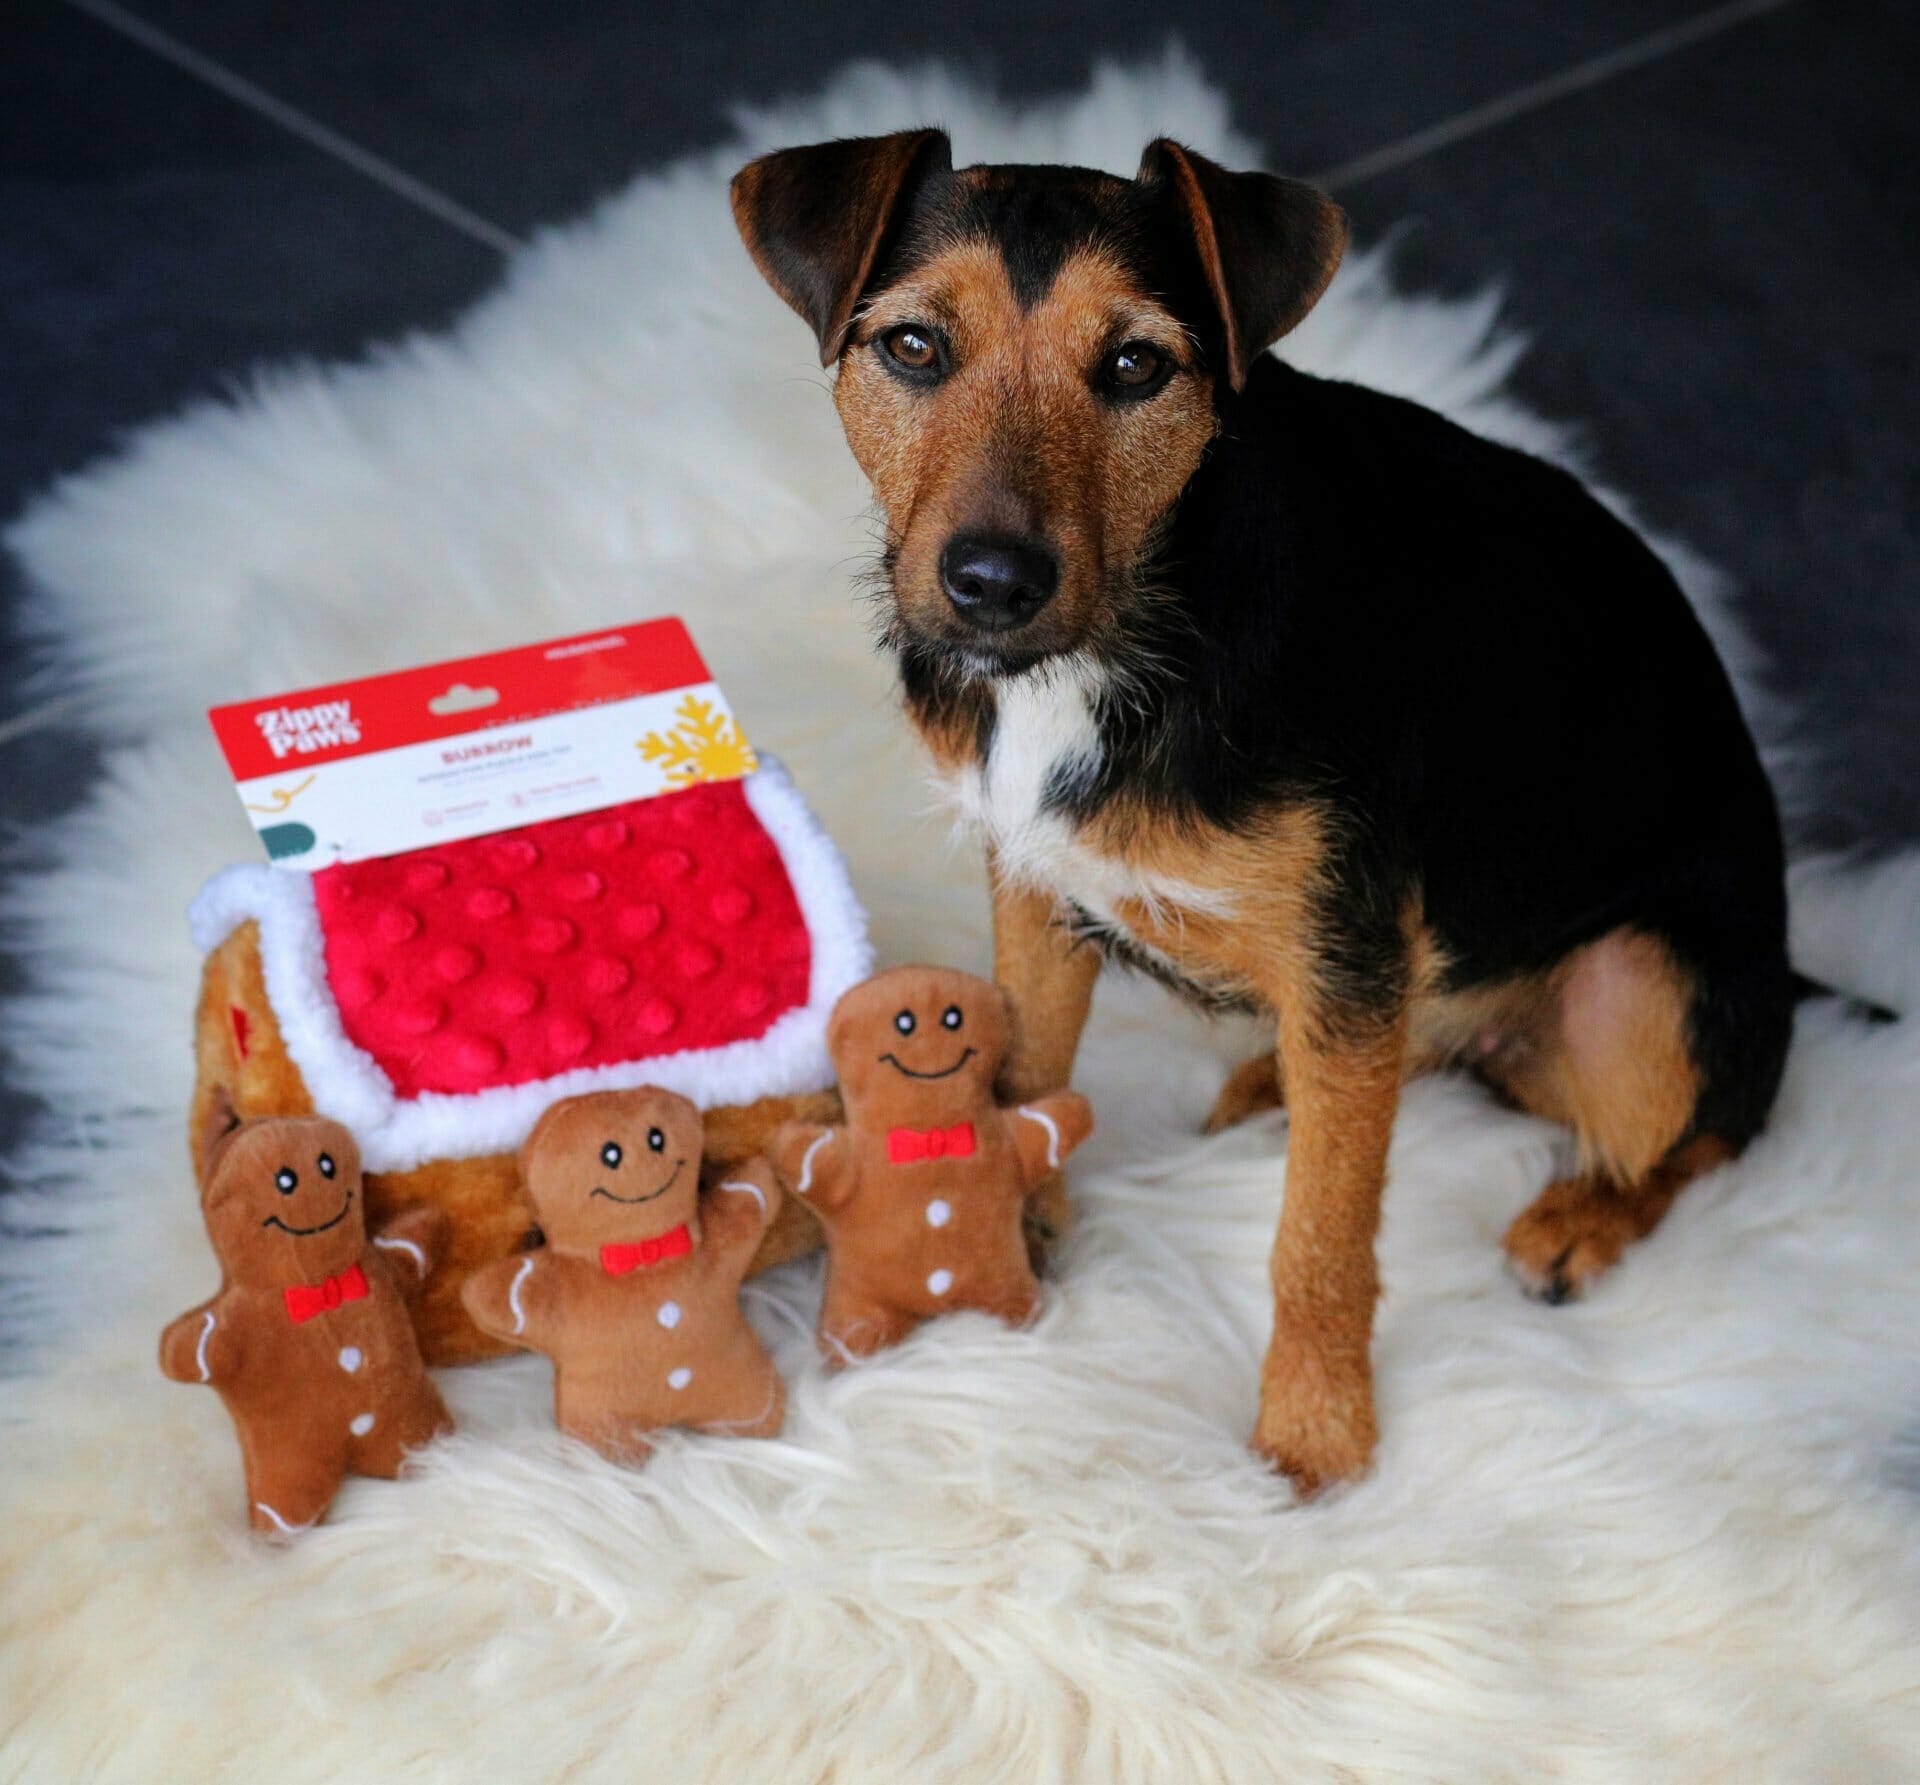 Gingerbread House Dog Toy from Cognitive Canine Company